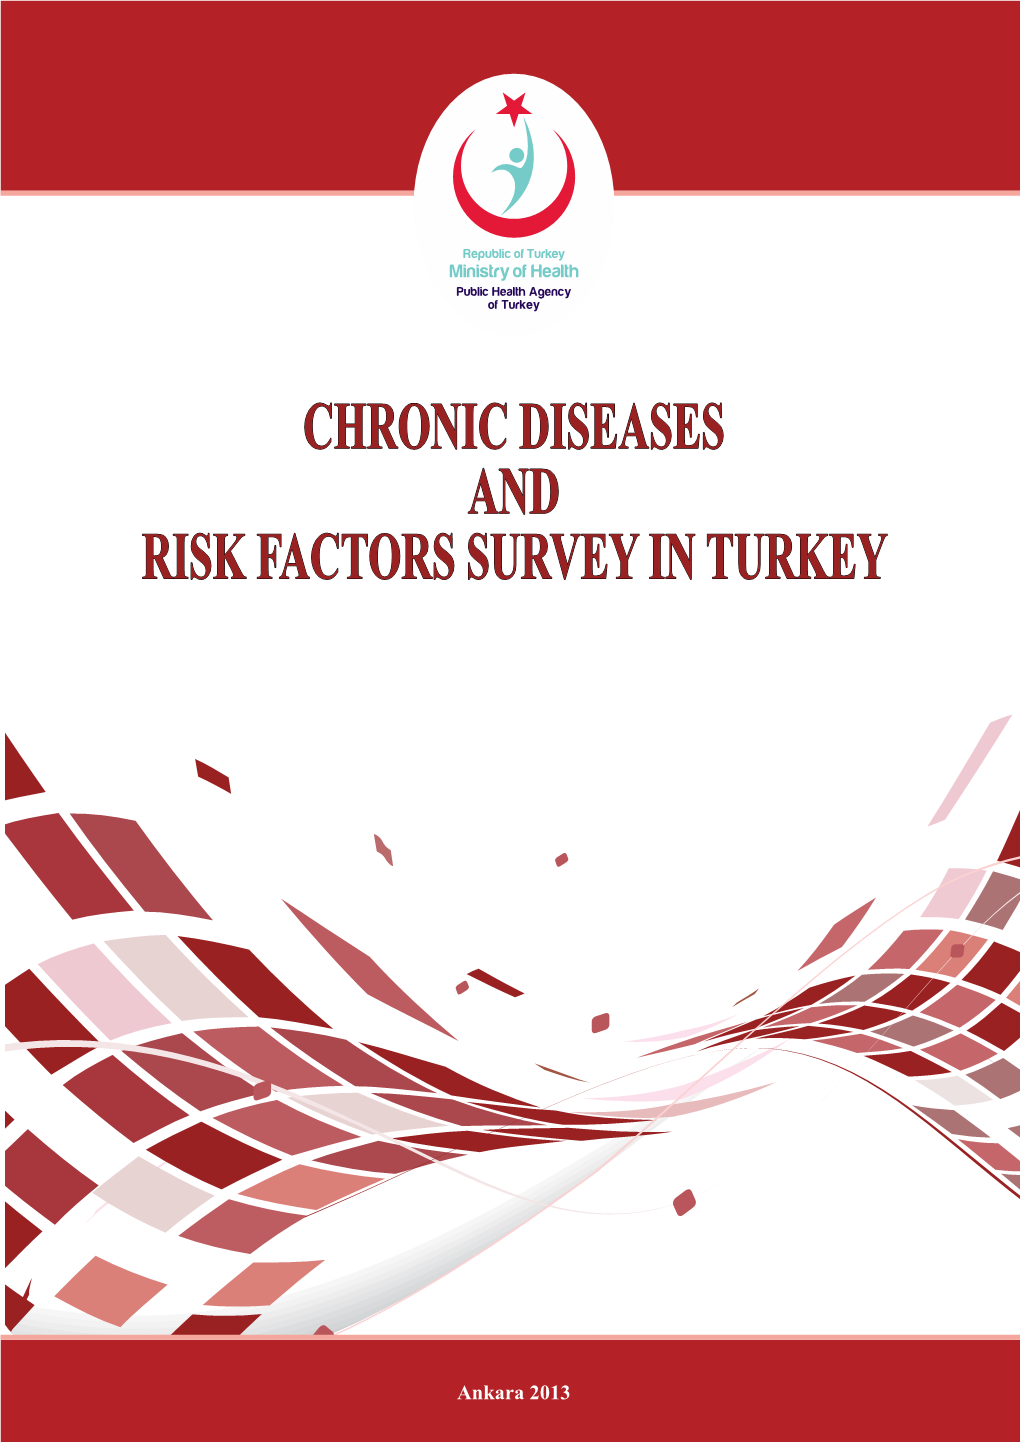 CHRONIC DISEASES and RISK FACTORS SURVEY in TURKEY RISK FACTORS SURVEY in TURKEY CHRONIC DISEASES Ankara 2013 and CHRONIC DISEASES and RISK FACTORS SURVEY in TURKEY